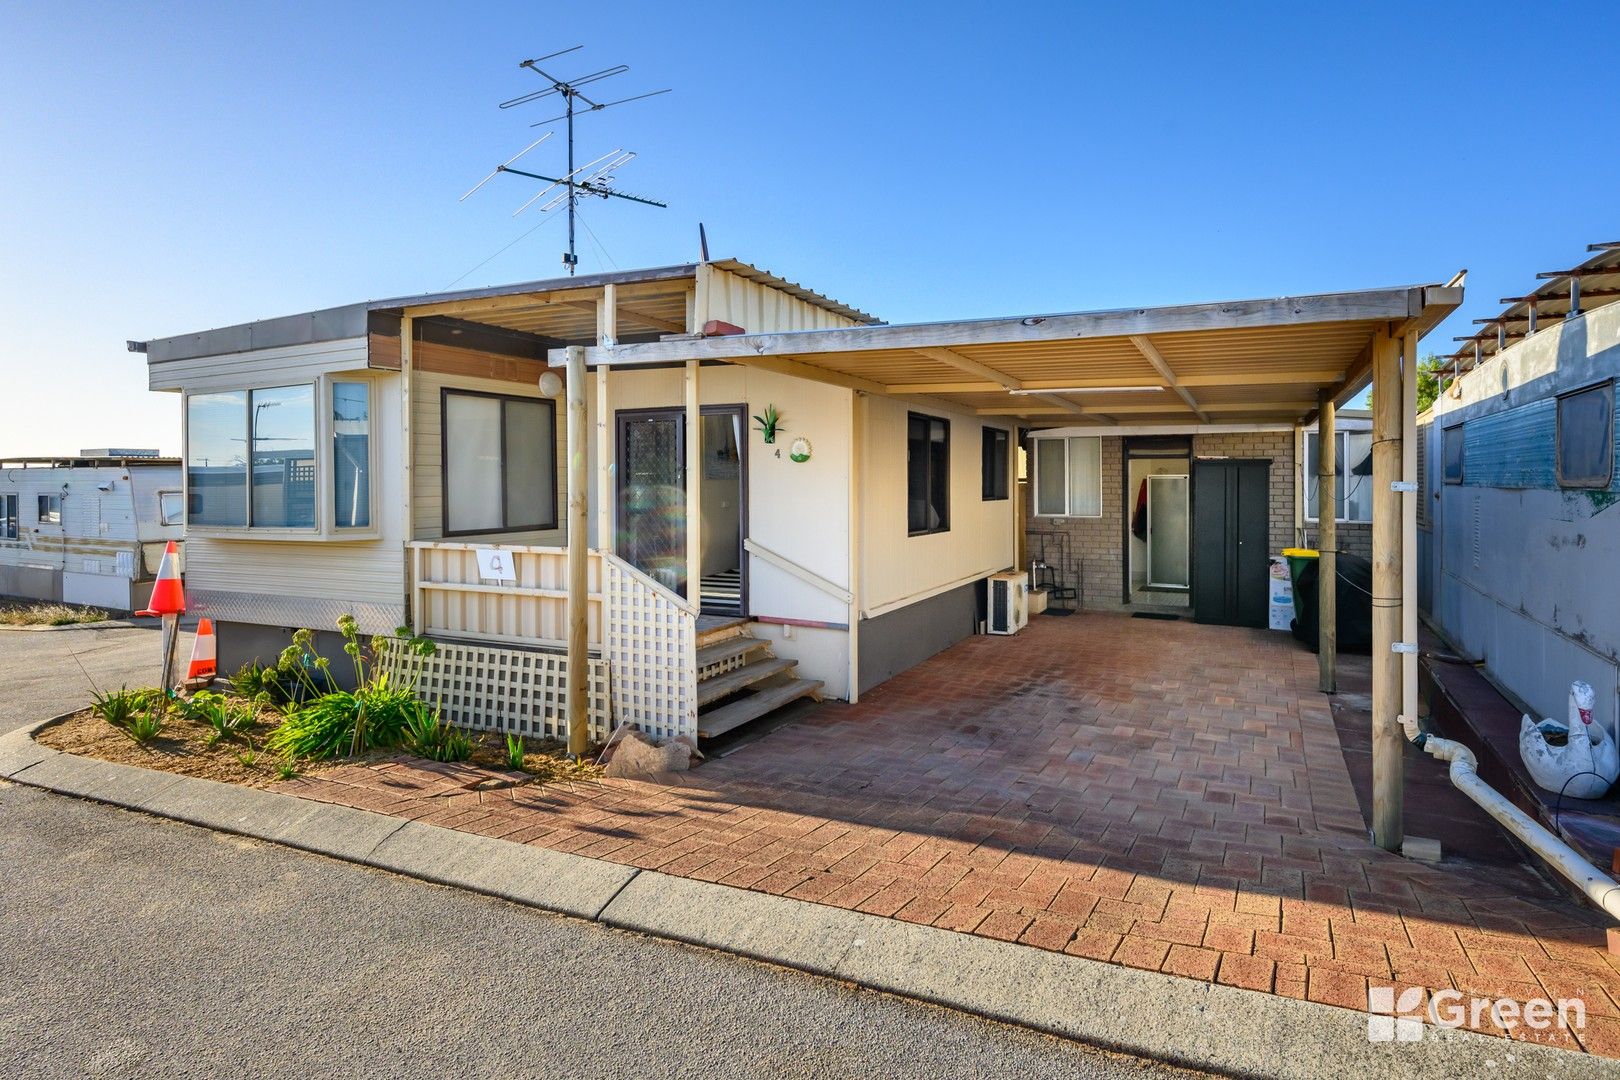 2 bedrooms Apartment / Unit / Flat in 4/1149 Old Coast Road DAWESVILLE WA, 6211